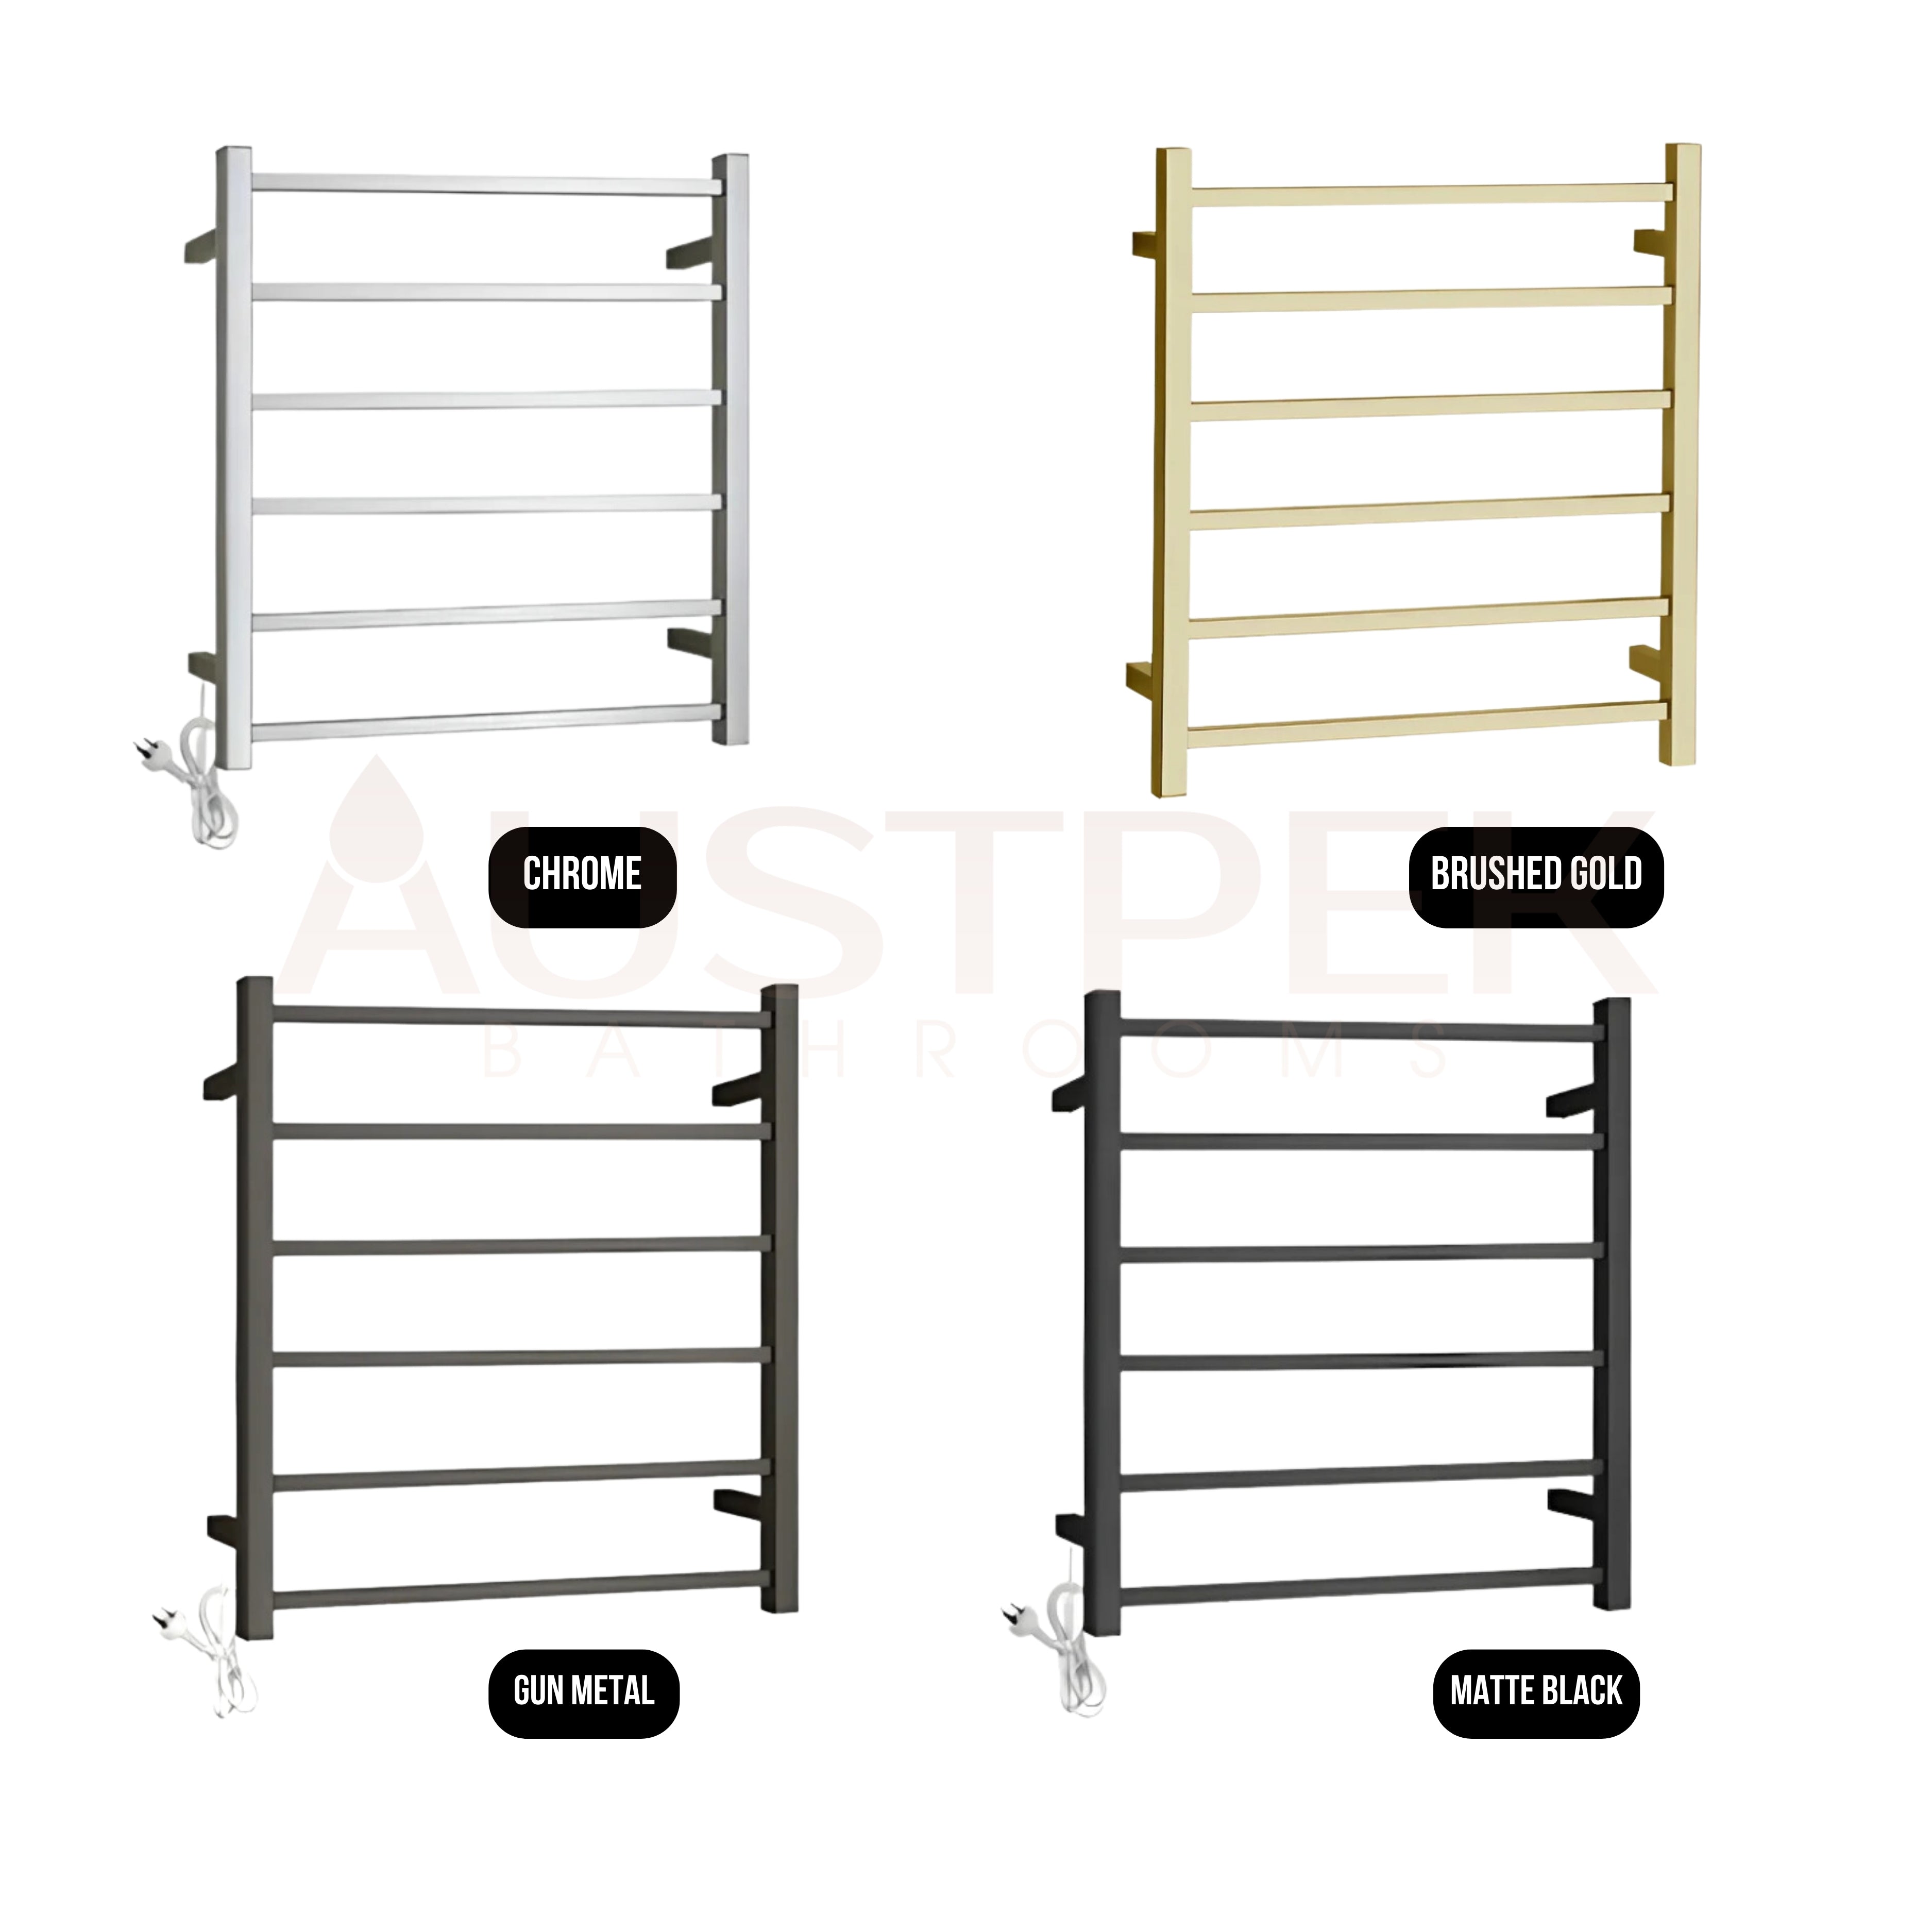 INSPIRE HEATED TOWEL RAIL 6 BAR SQUARE BRUSHED GOLD 680MM